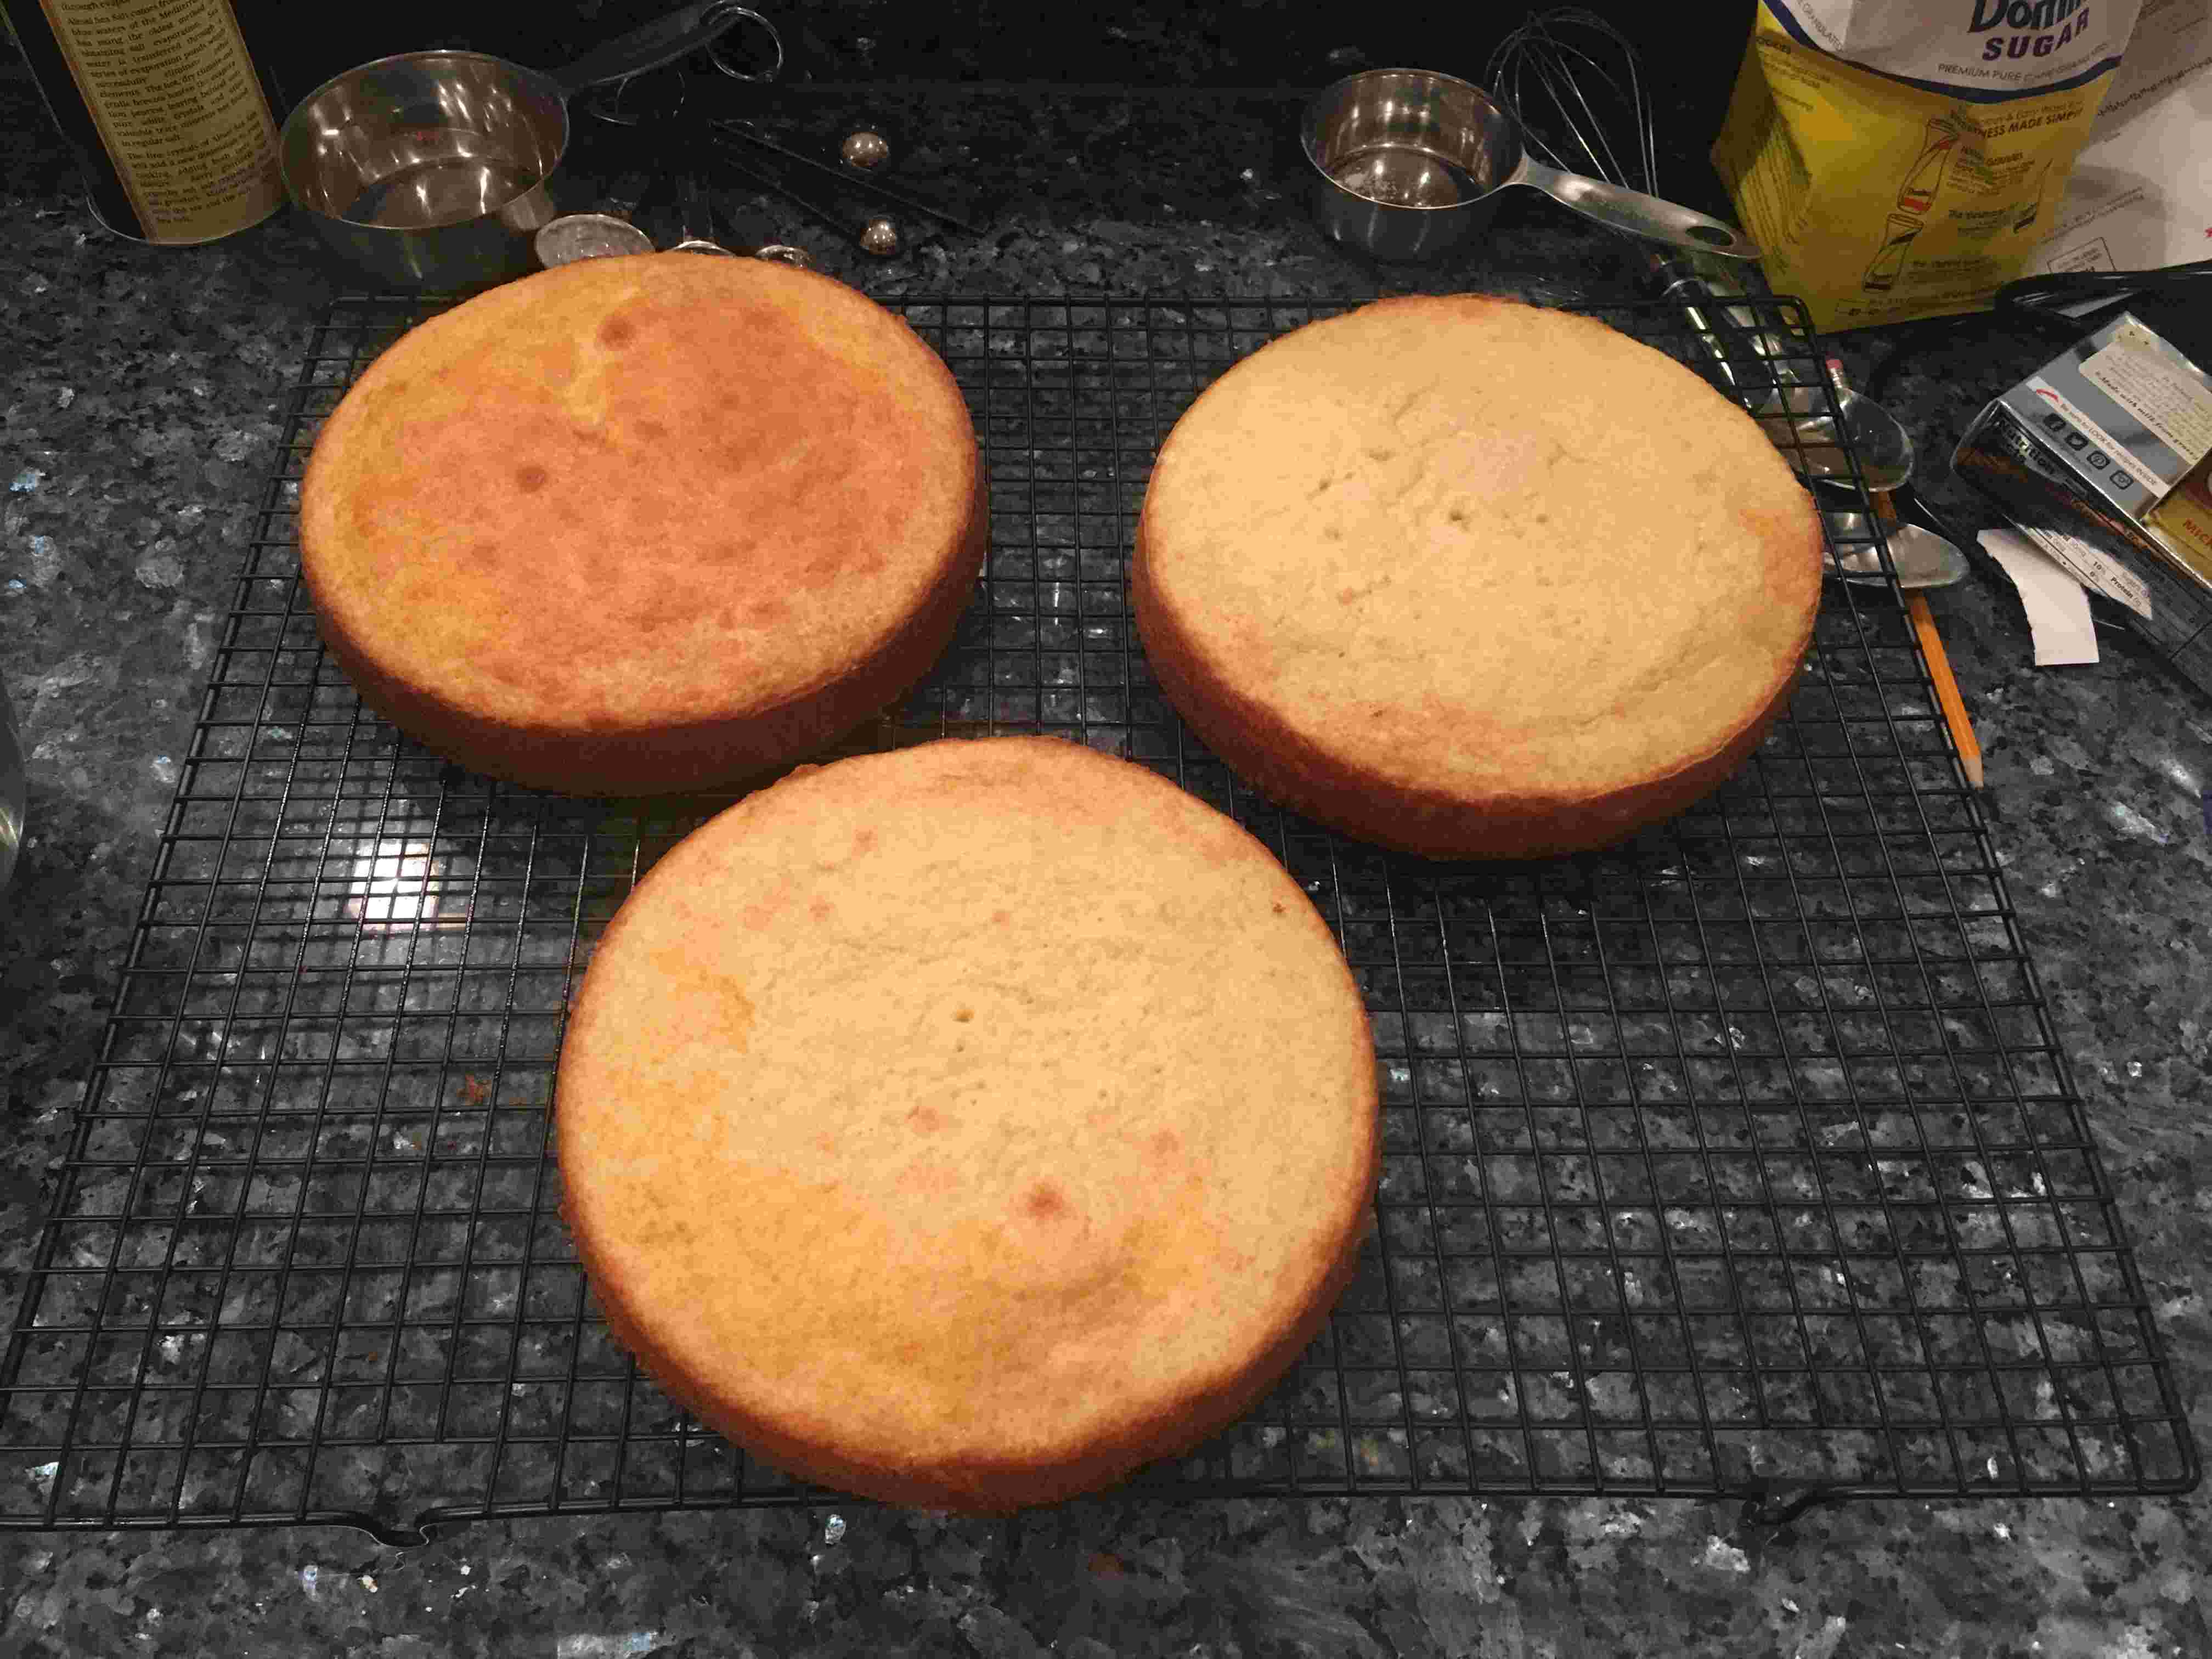 Whoops - one of these is not like the other. If your oven has hot spots, rotate your cakes about 3/4 of the way through the baking time!